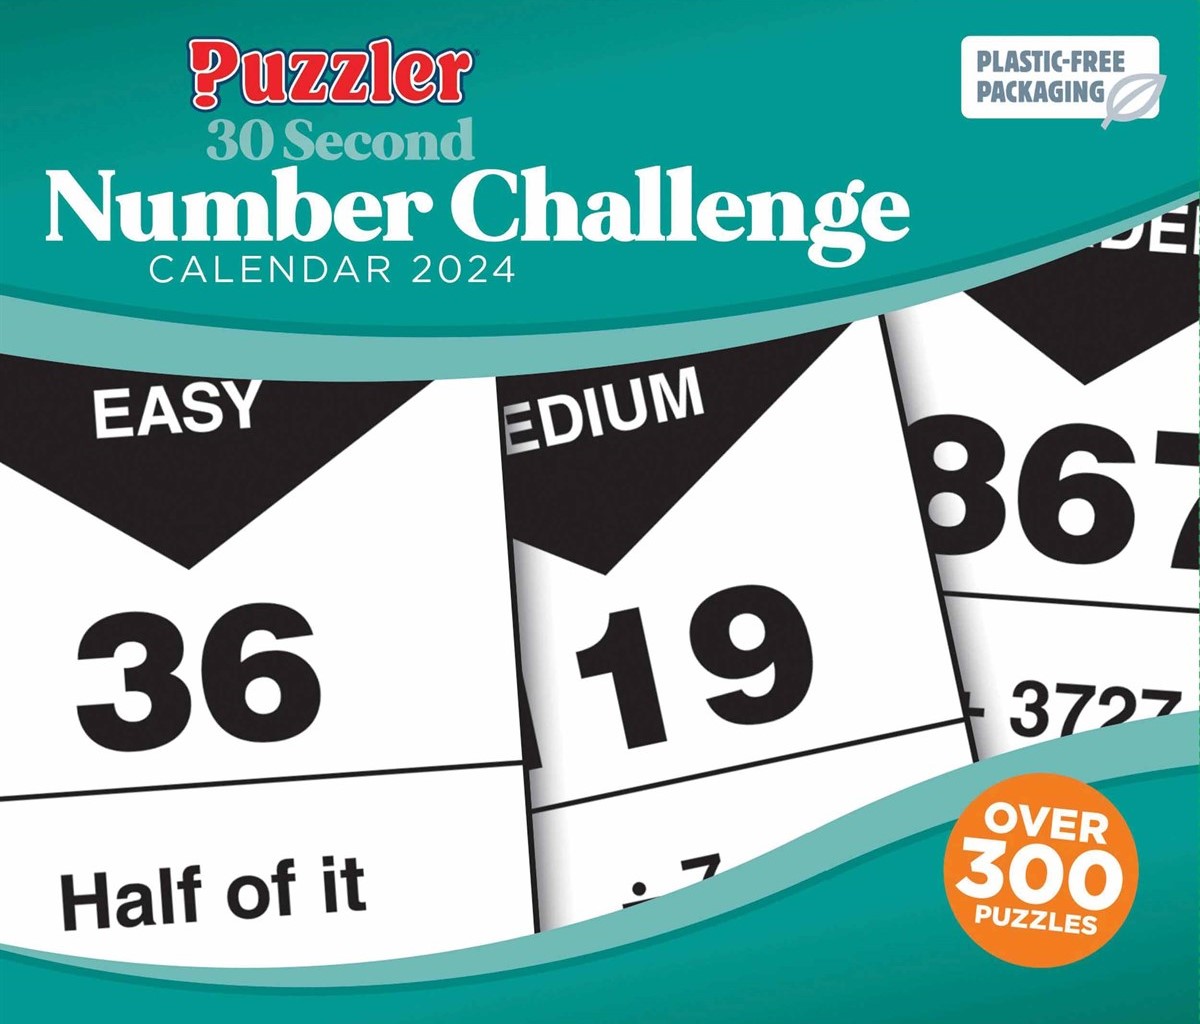 Calendar 2024 - 30 Second Number Challenge Puzzler | Carousel